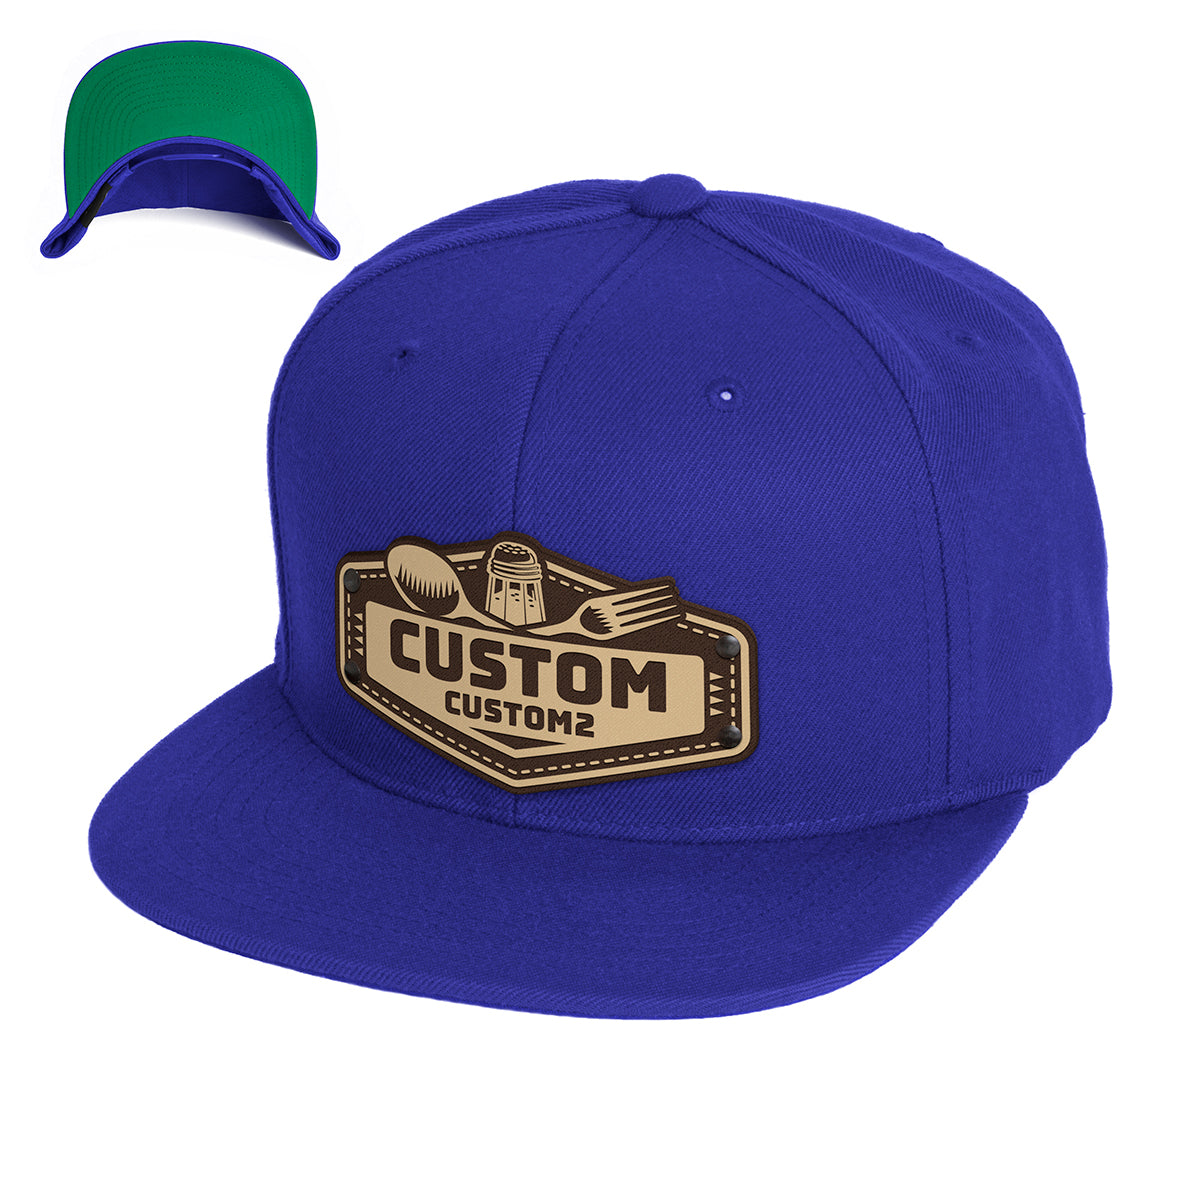 Restaurant Custom Leather Patch Hat - Citylocs, Trucker / One Size Fits All / Camo & Blk Mesh TR